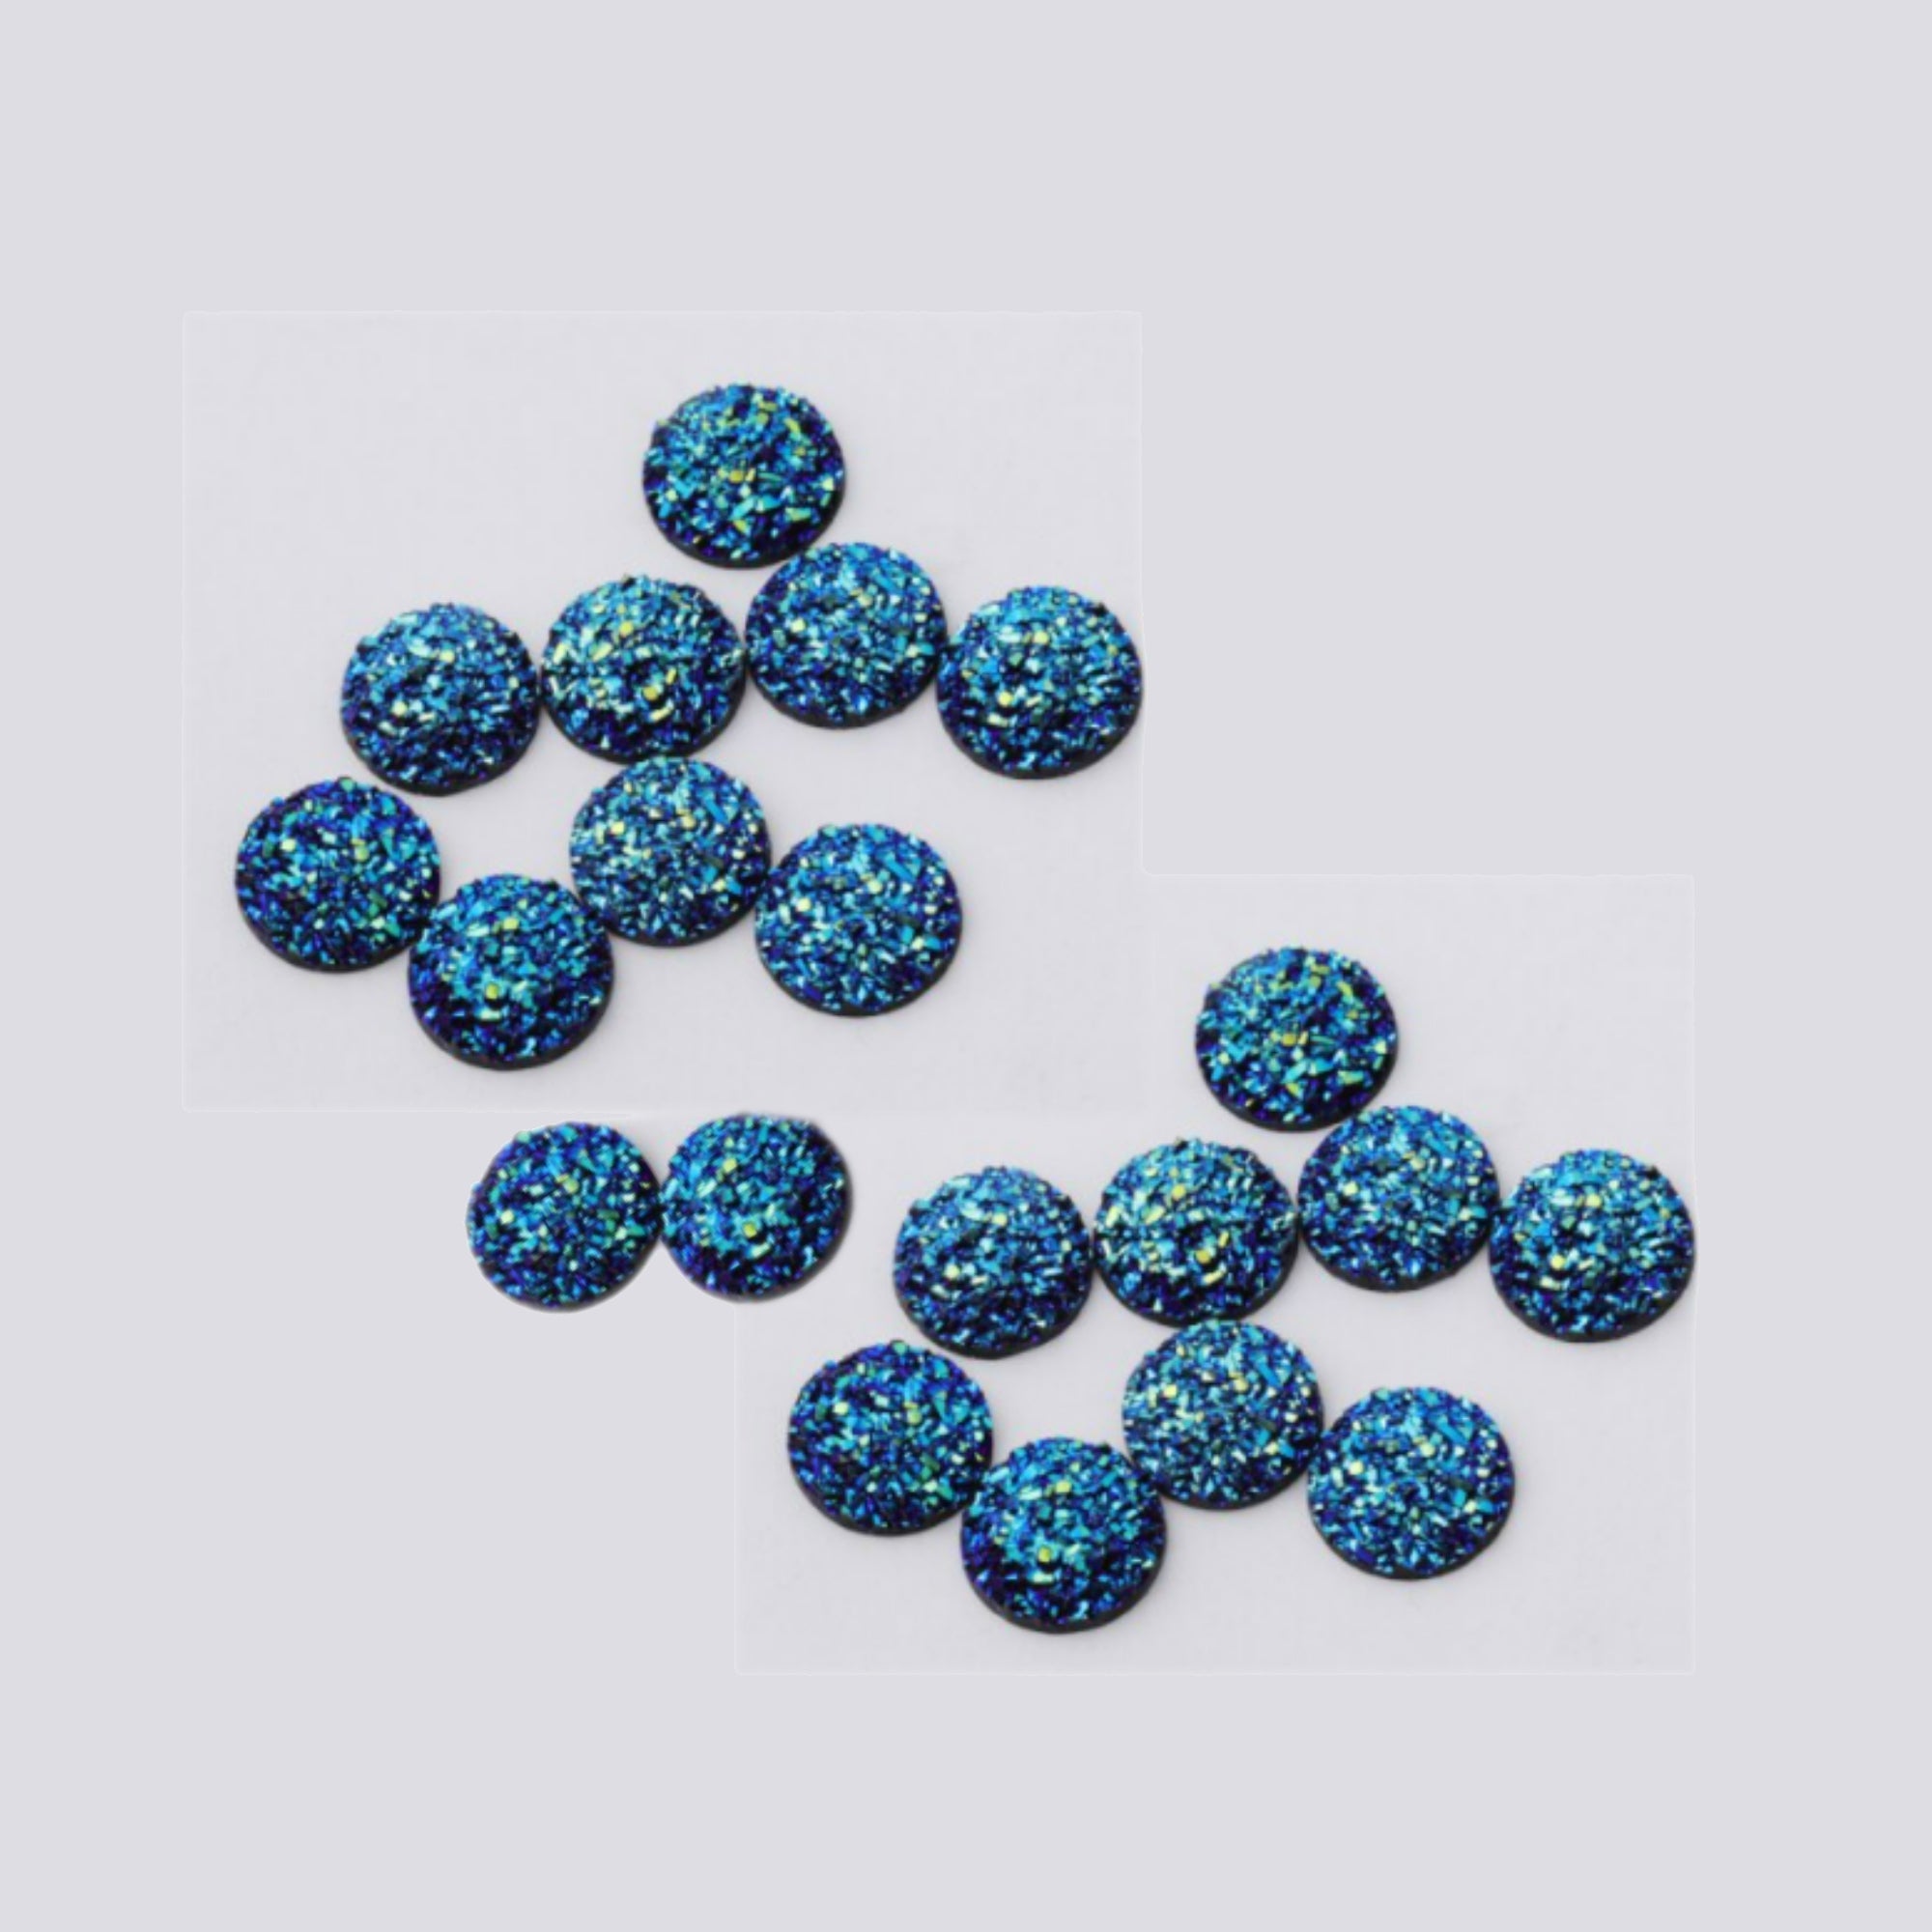 Bling It Up Collection 3/8" Peacock Chunky Round Bling - Pkg. of 20